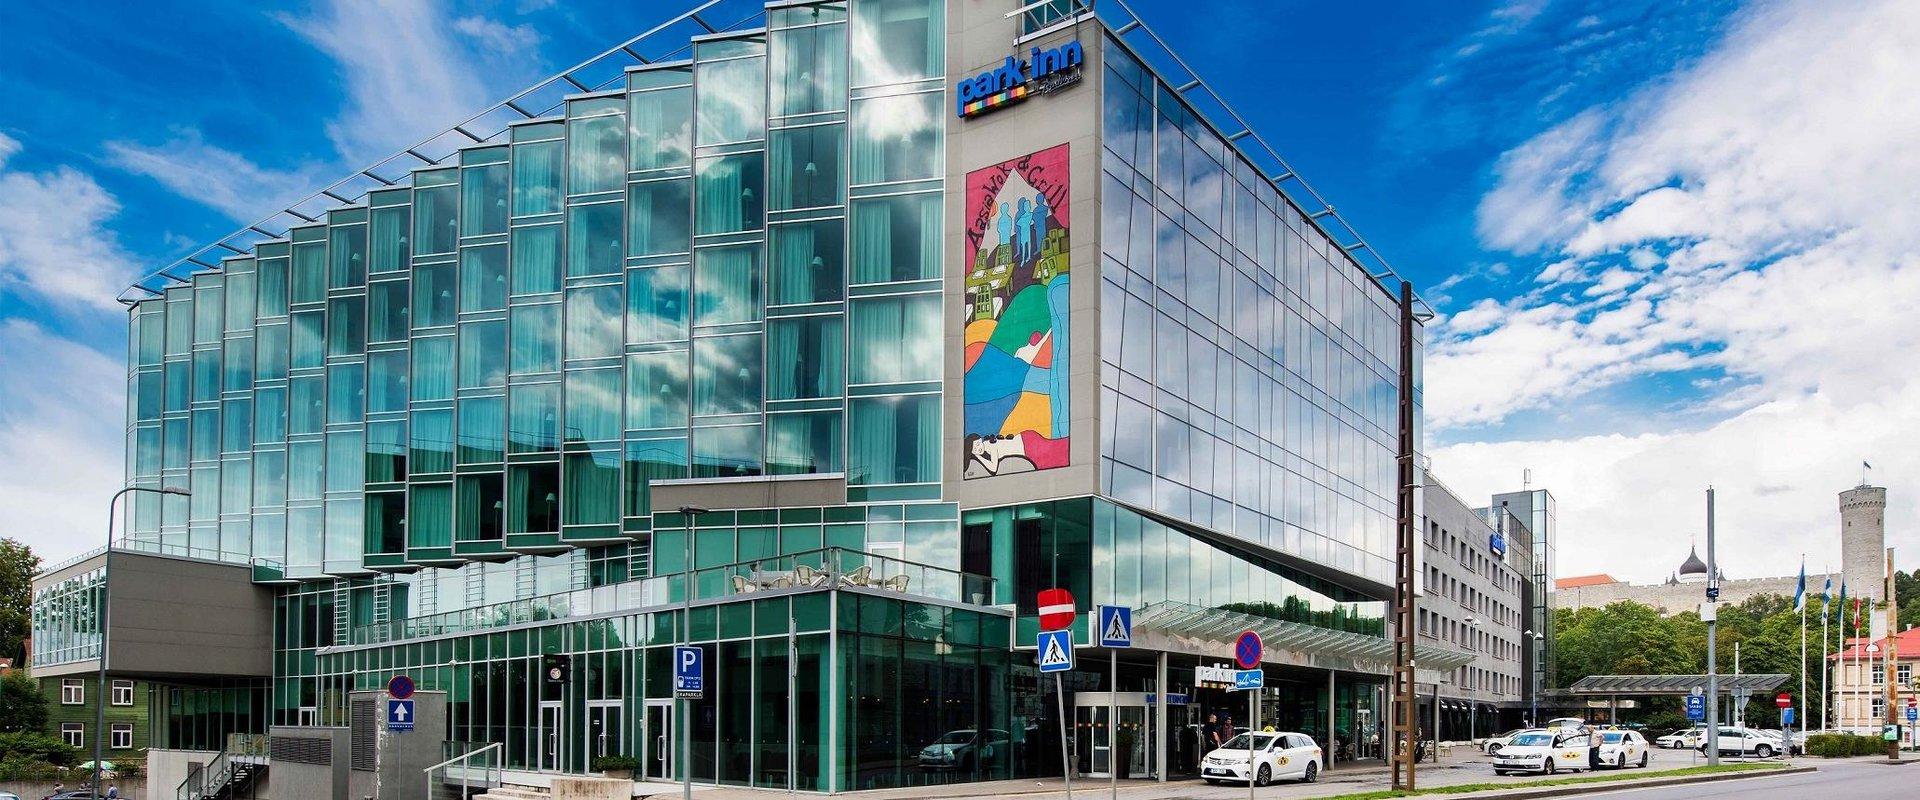 Park Inn by Radisson Meriton Conference & Spa Hotel Tallinn is in the heart of Tallinn, just a short walk from the Old Town. The hotel has 465 rooms, 